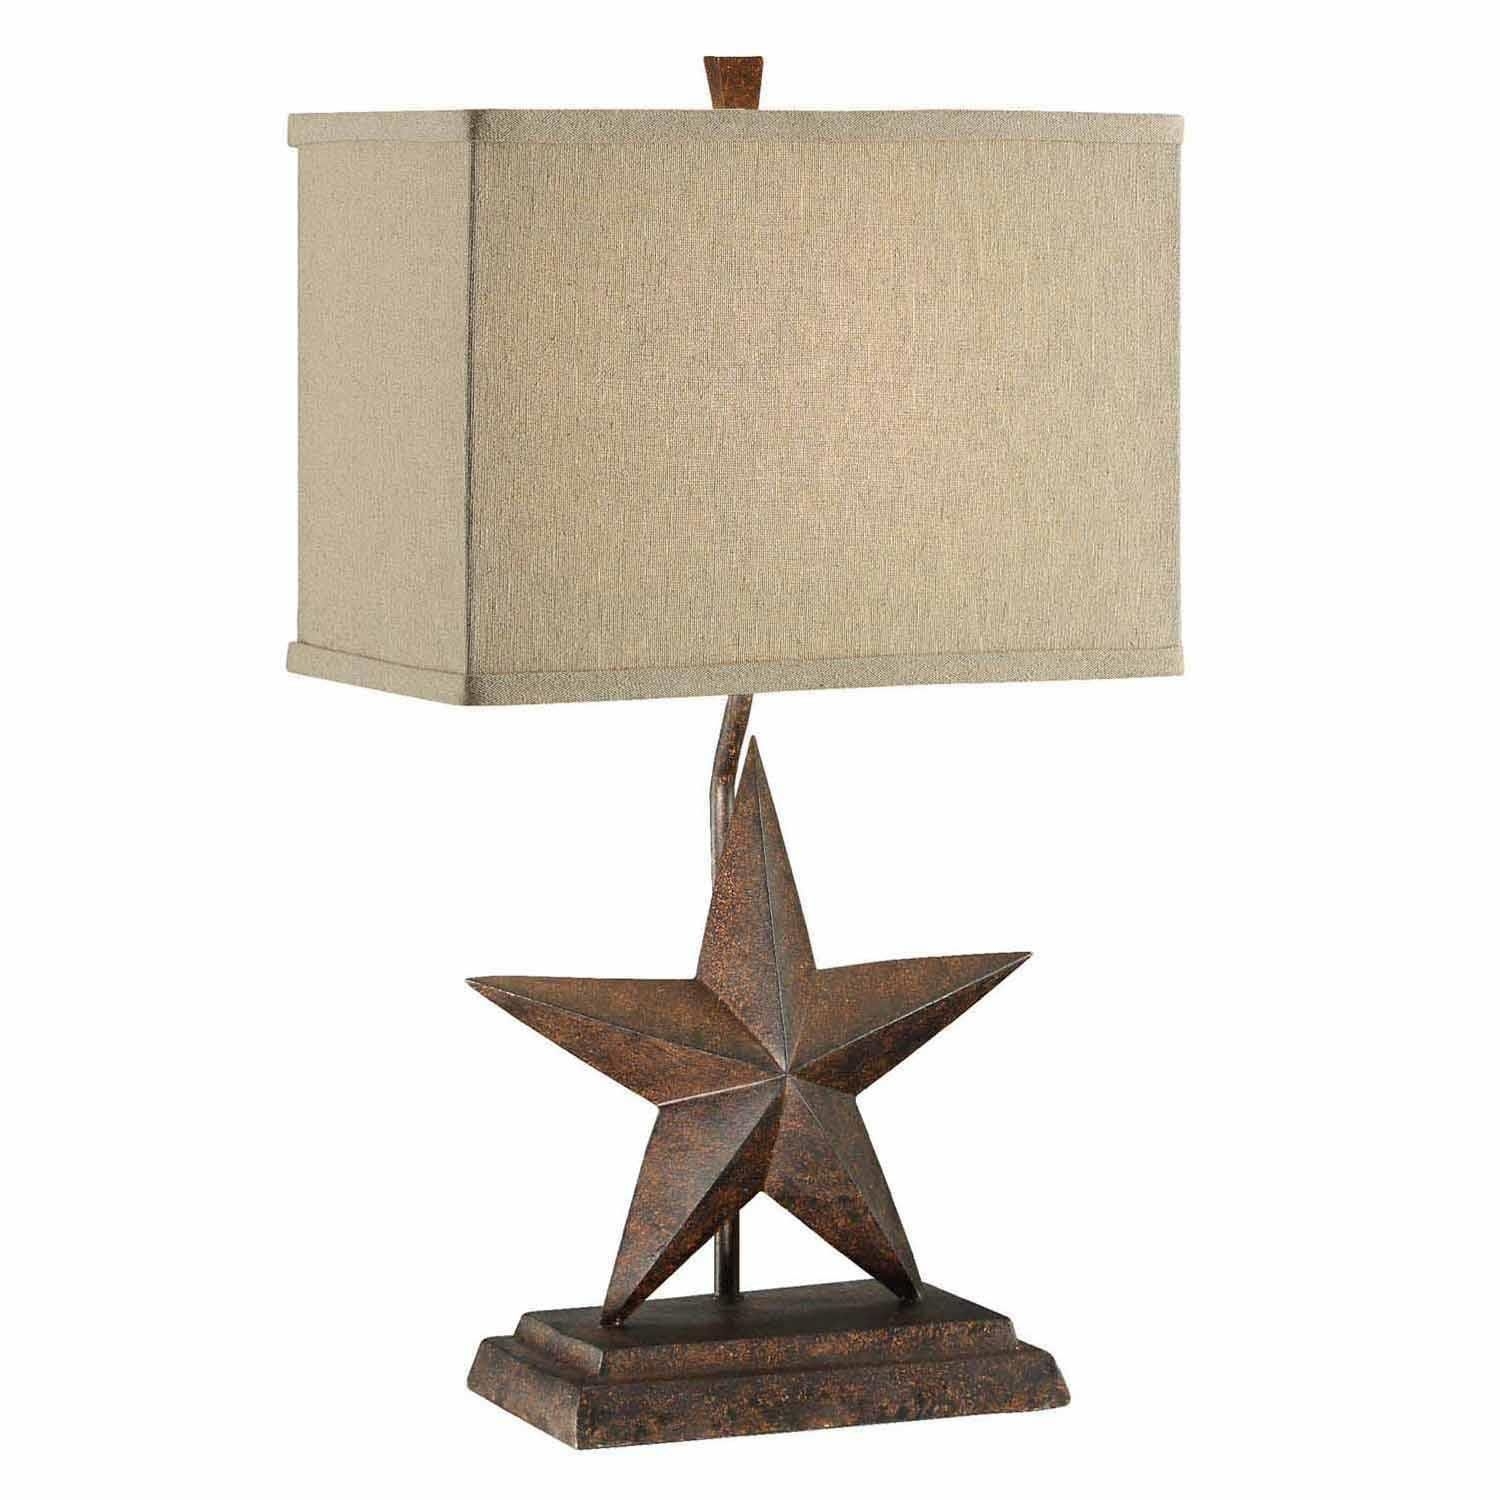 Star 23" H Table Lamp with Rectangular Shade